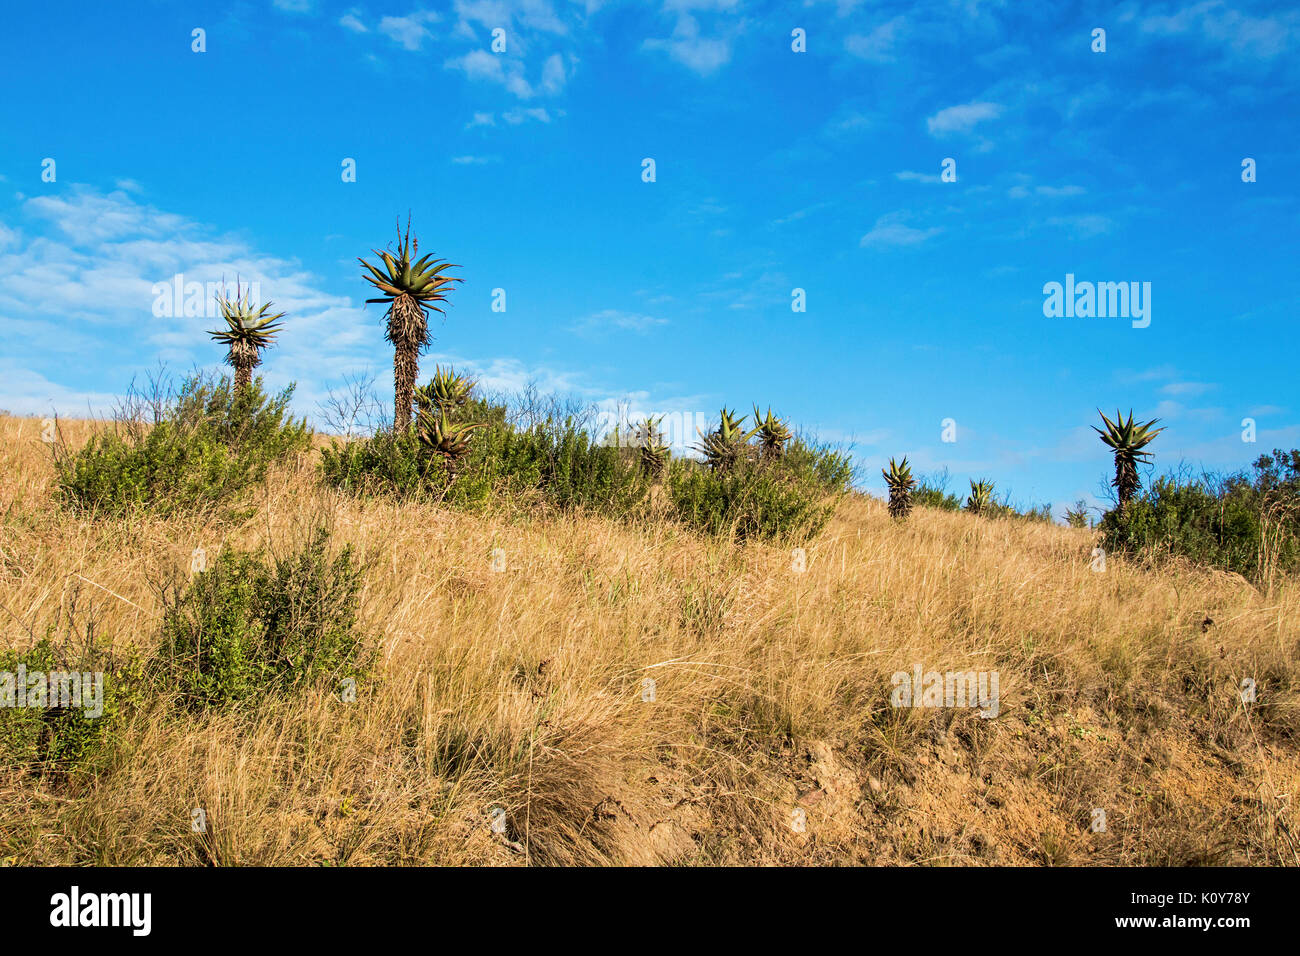 Aloe plants and dry winter grassland against blue cloudy sky landscape at Lake Eland Game Reserve in South Africa Stock Photo